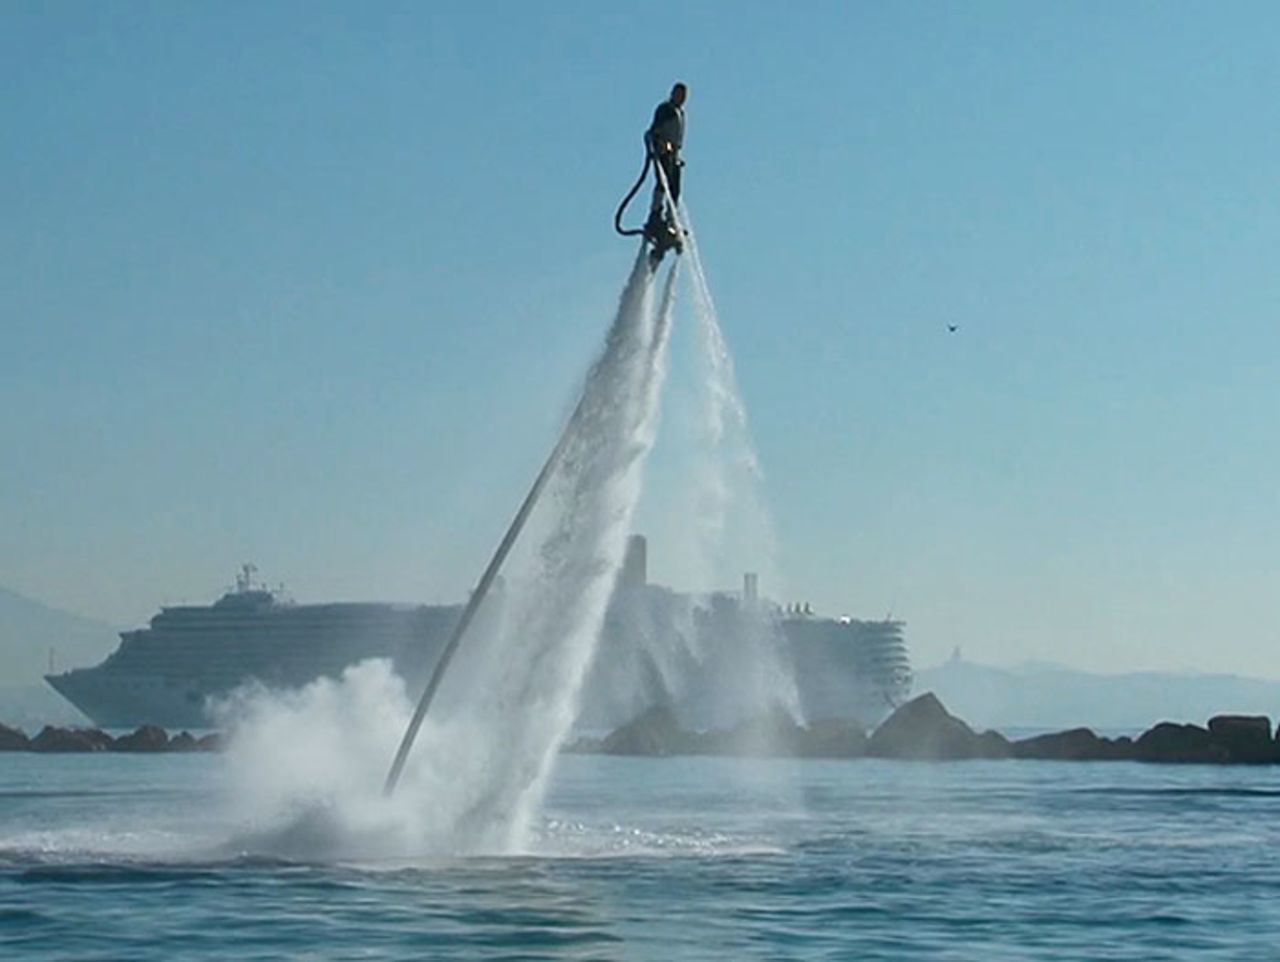 A similar concept but for leisure, Flyboarding allows you to soar through the skies like you're Iron Man. The device channels the water through a long hose that in turn connects to a pair of jet boots. 